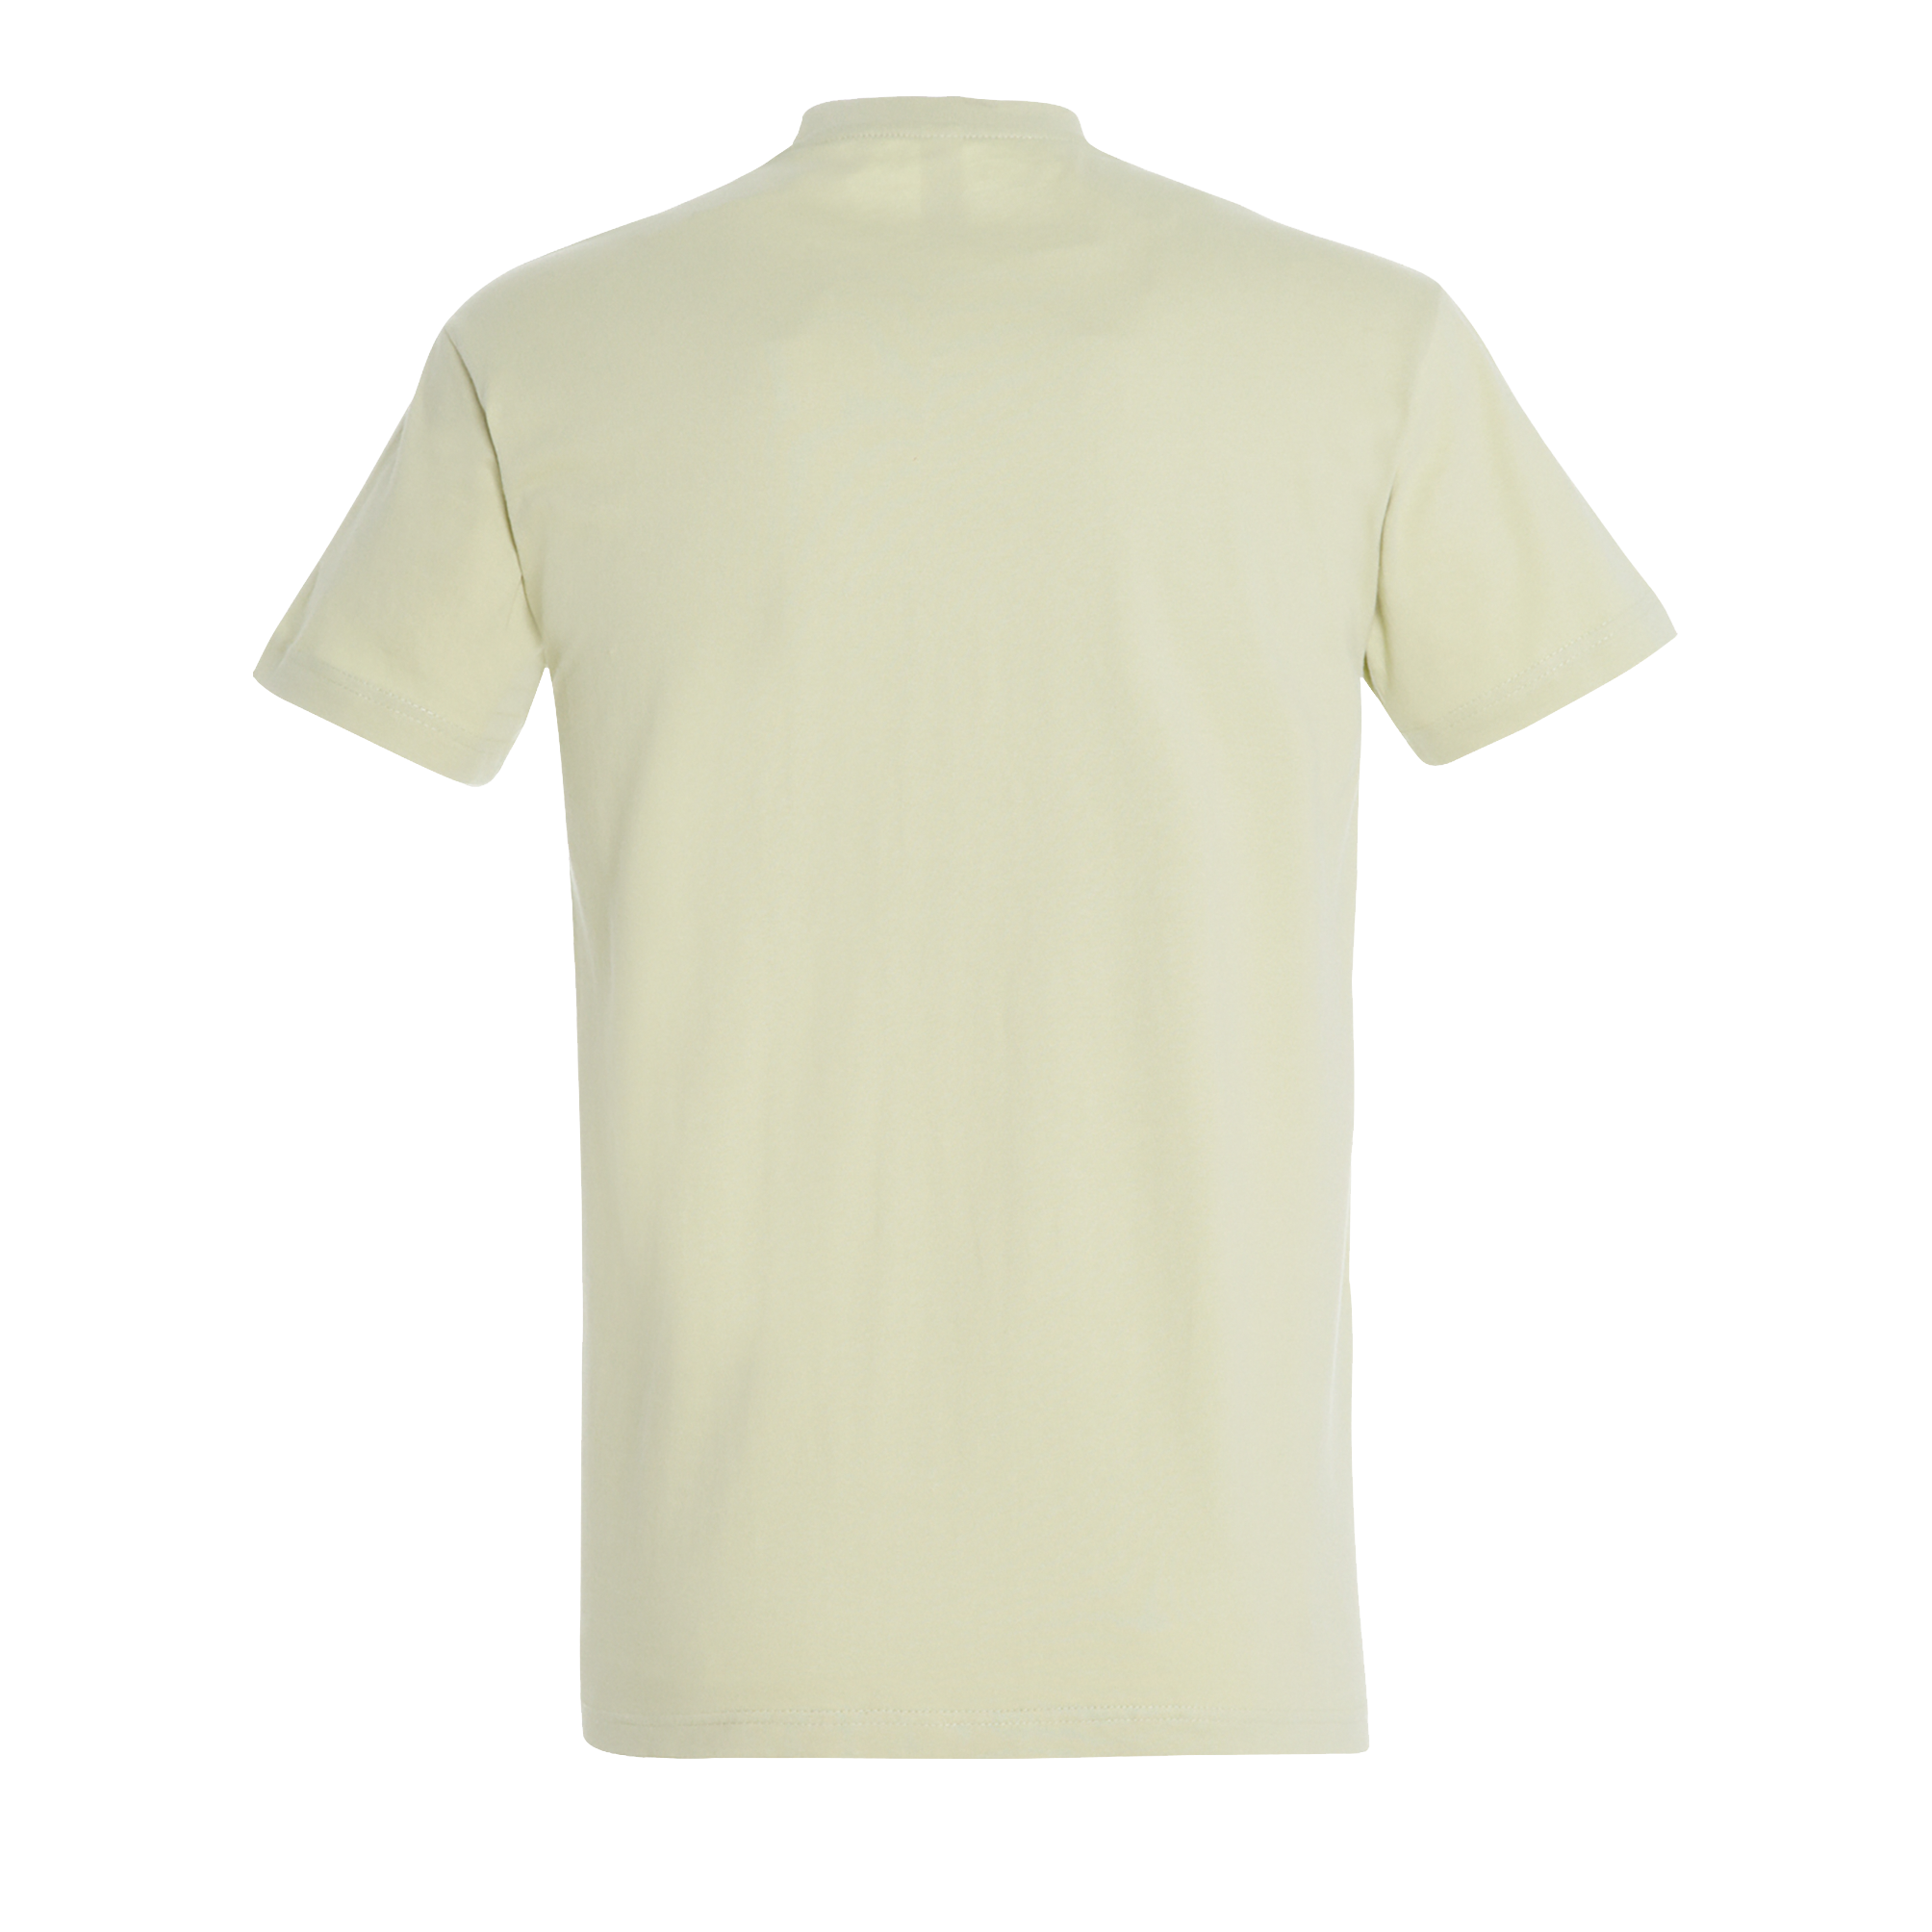 images/stories/virtuemart/sols20/2658_teeshirt_homme_col_rond_imperial_apple_green_dos